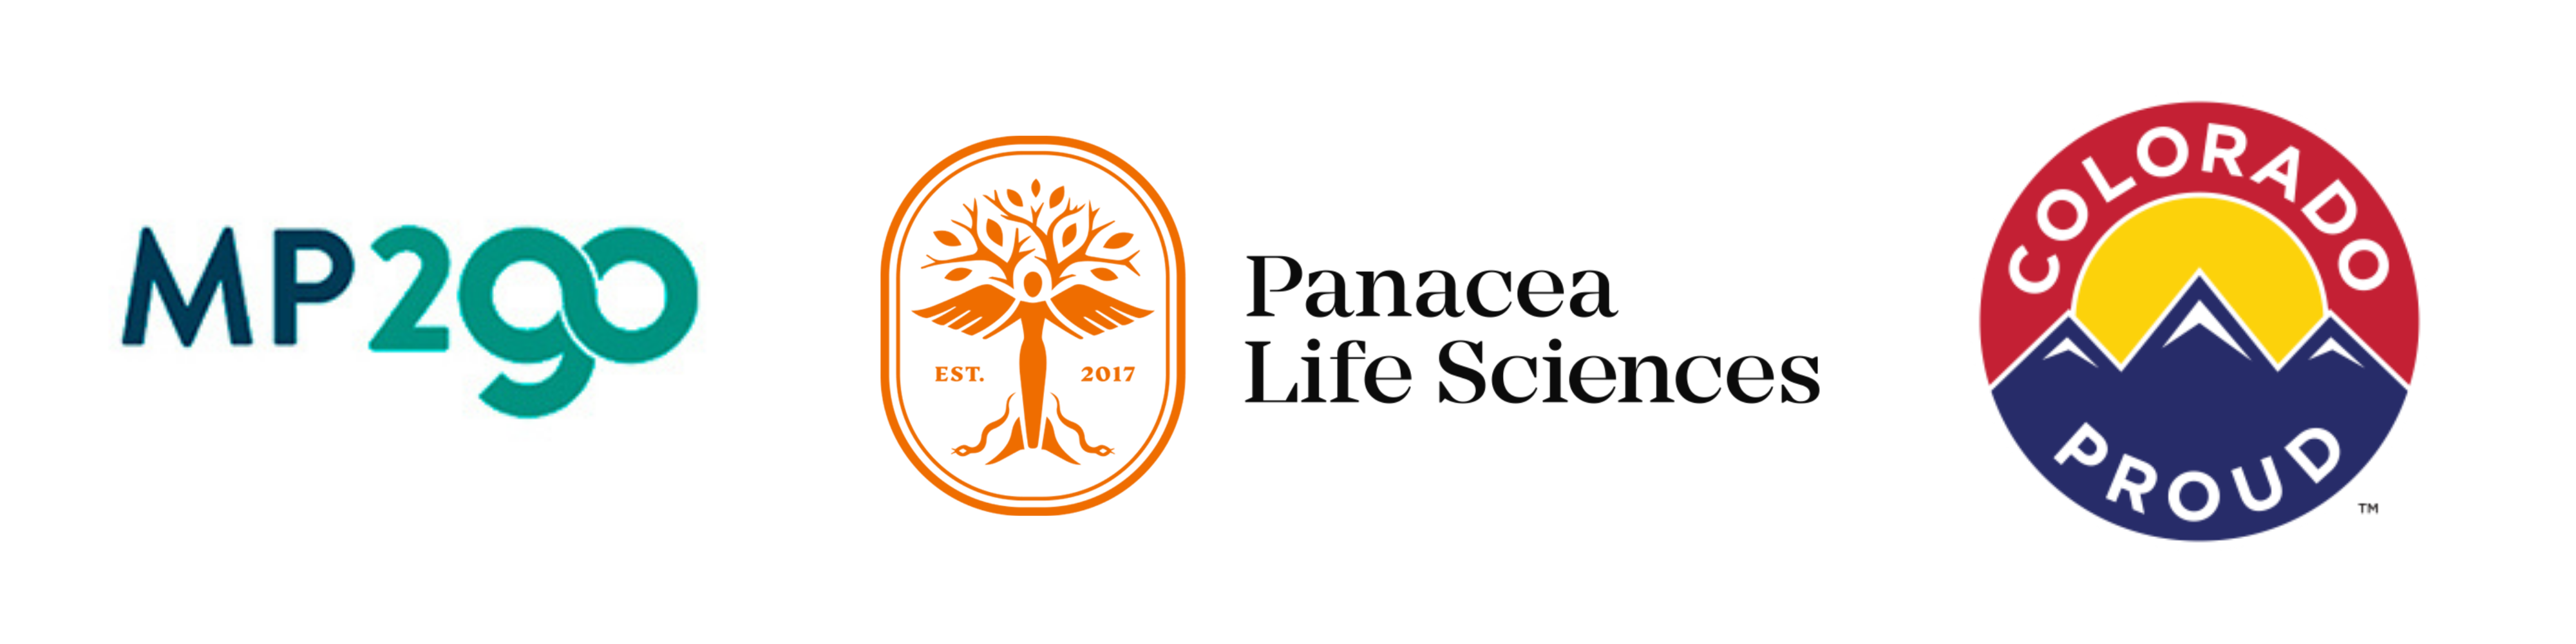 Panacea Life Sciences, Inc, Wednesday, February 2, 2022, Press release picture